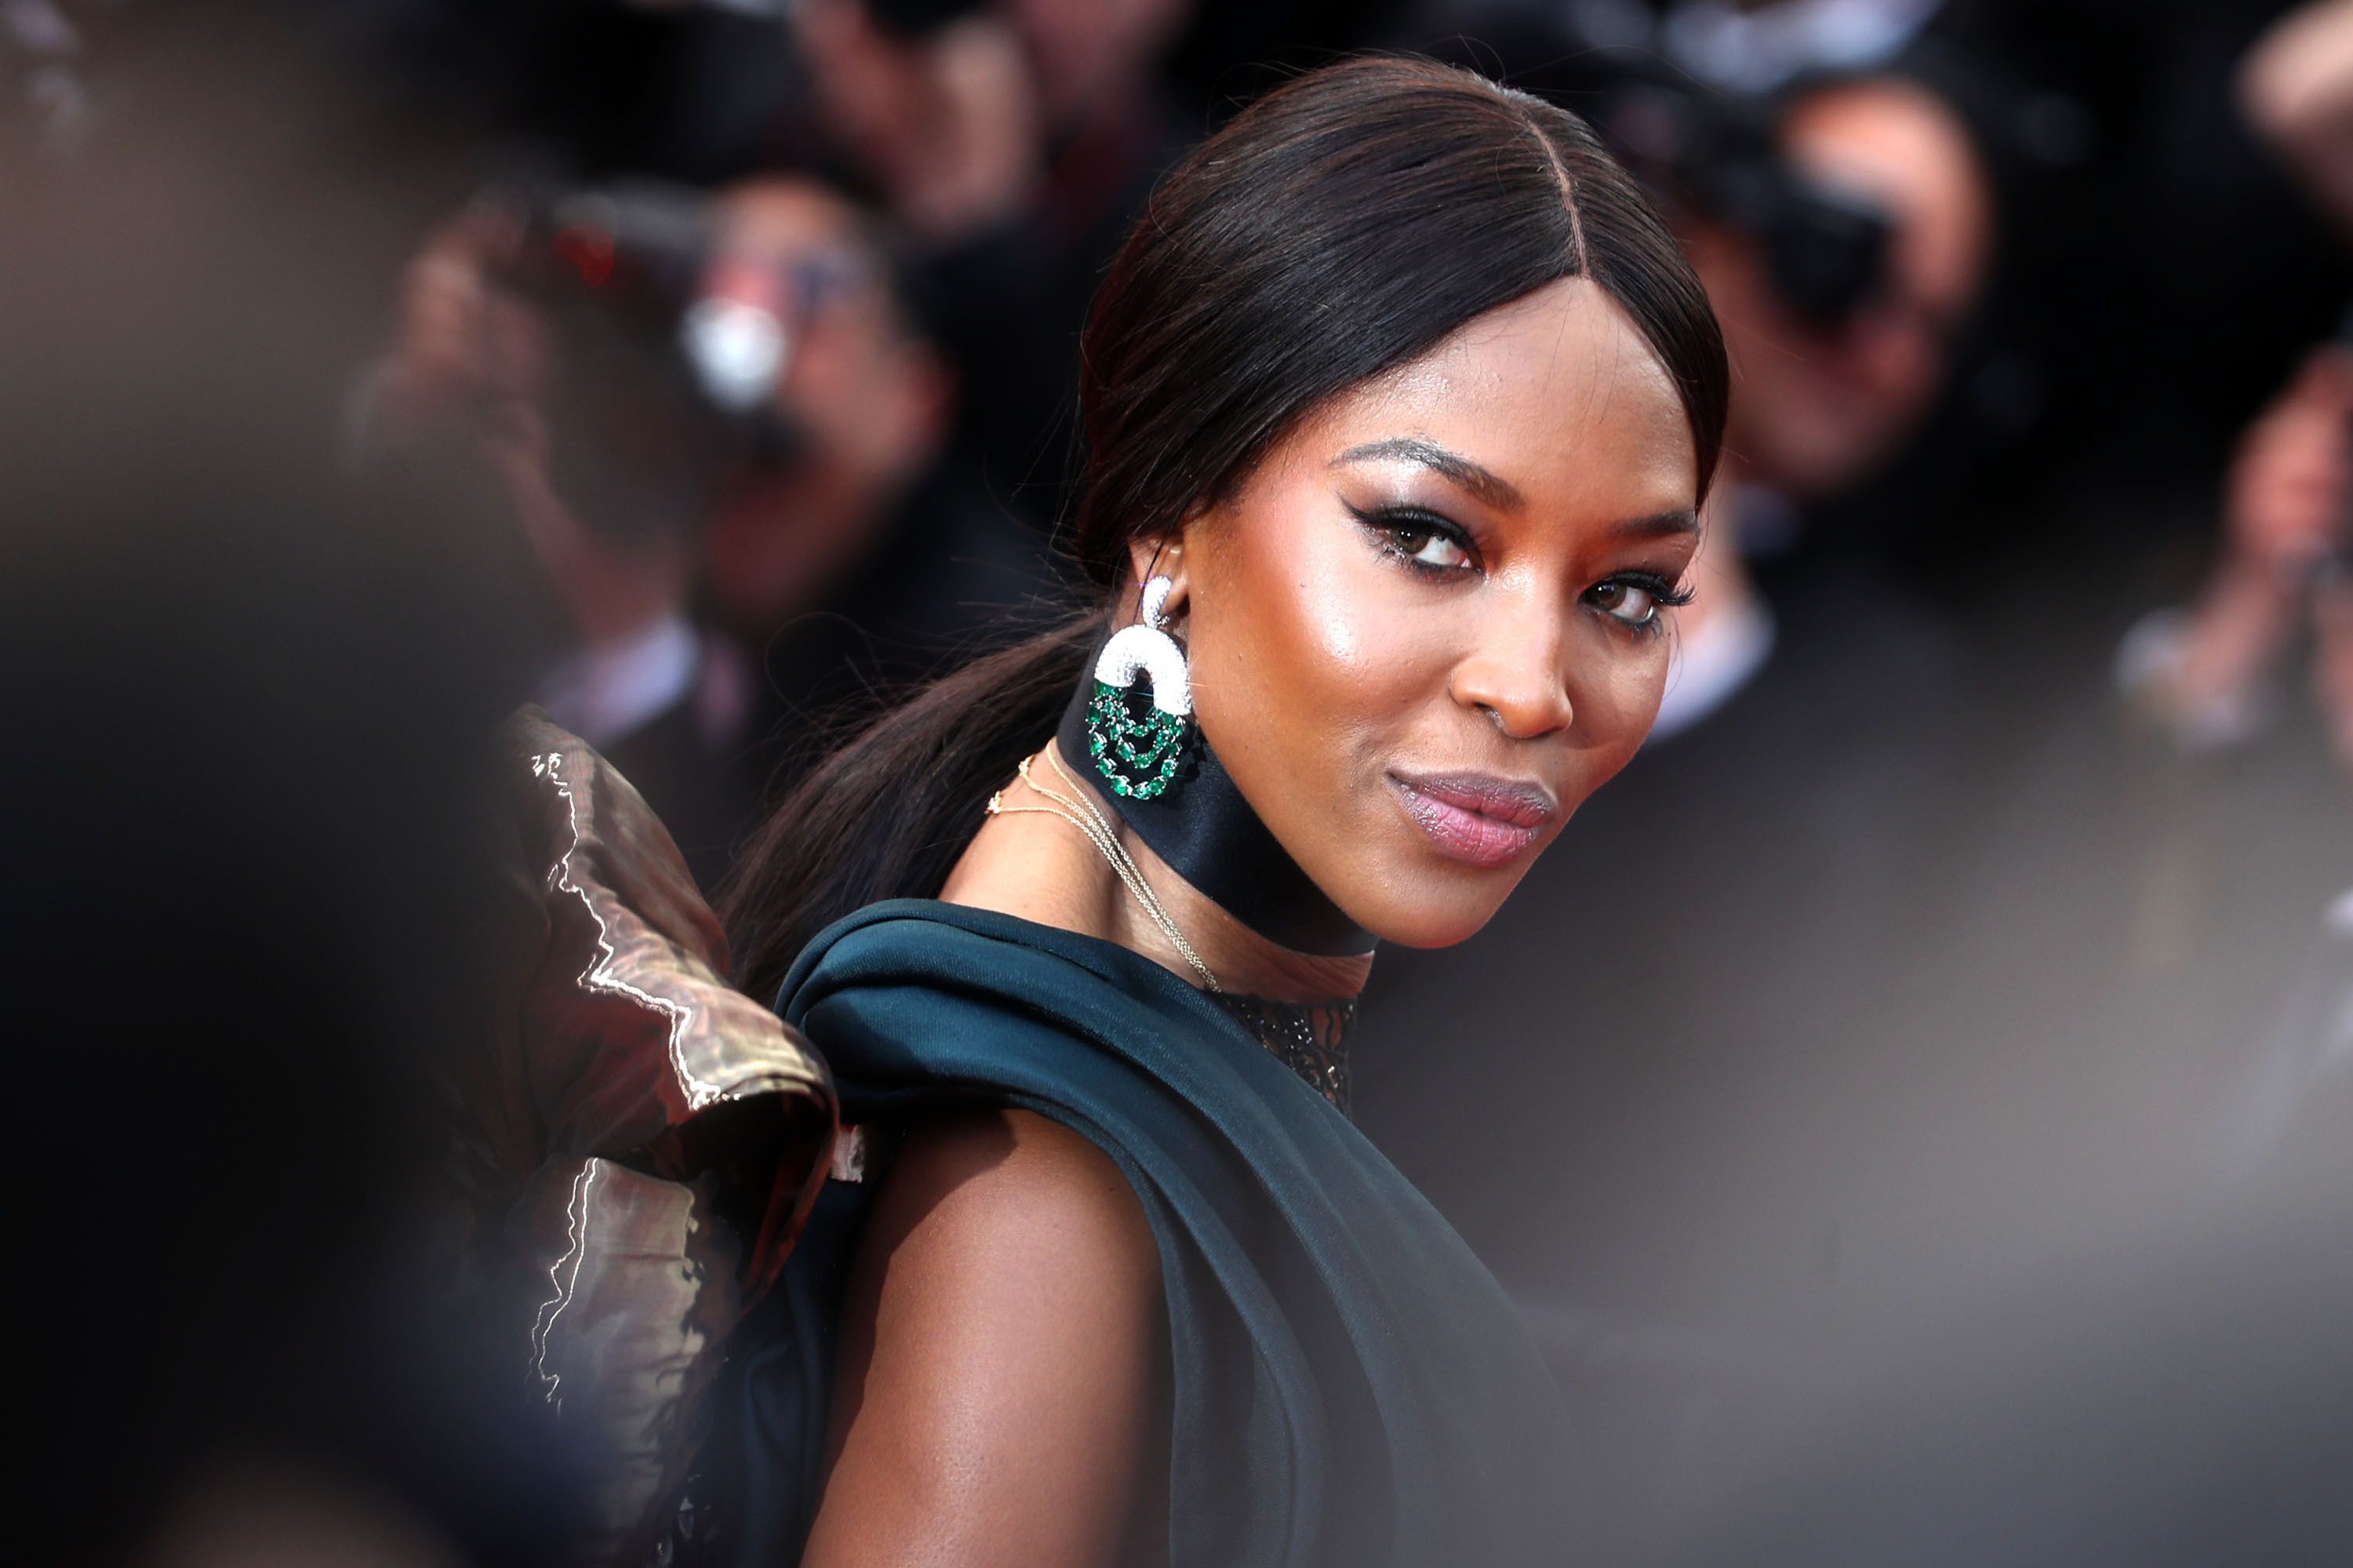 Naomi Campbell interview: 'The whole world is addressing racism, so England  is going to have to deal with it'